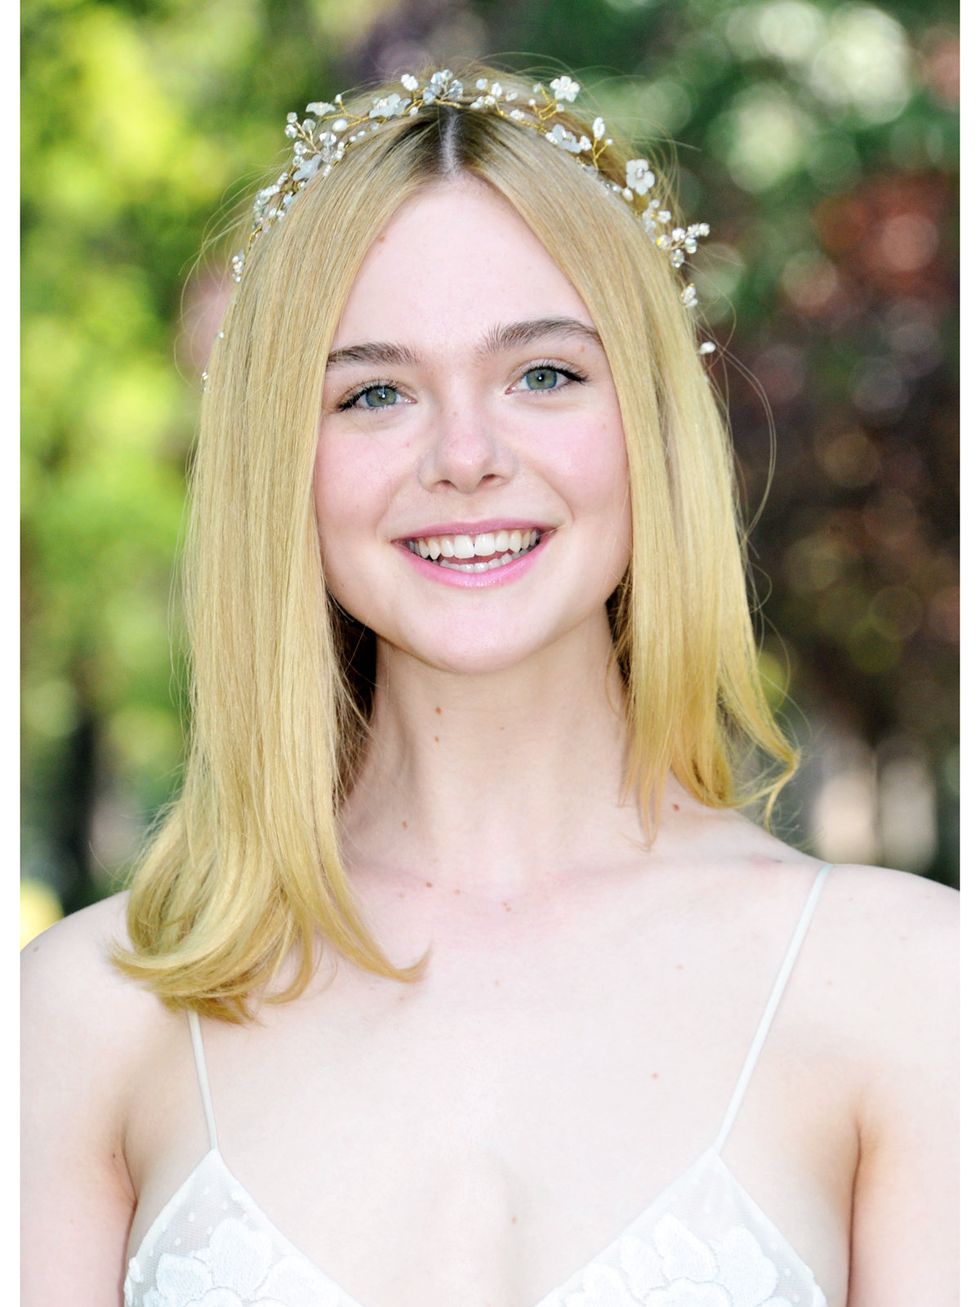 Hairstyle, Skin, Shoulder, Eyebrow, Photograph, Hair accessory, Happy, Headpiece, Facial expression, Style, 